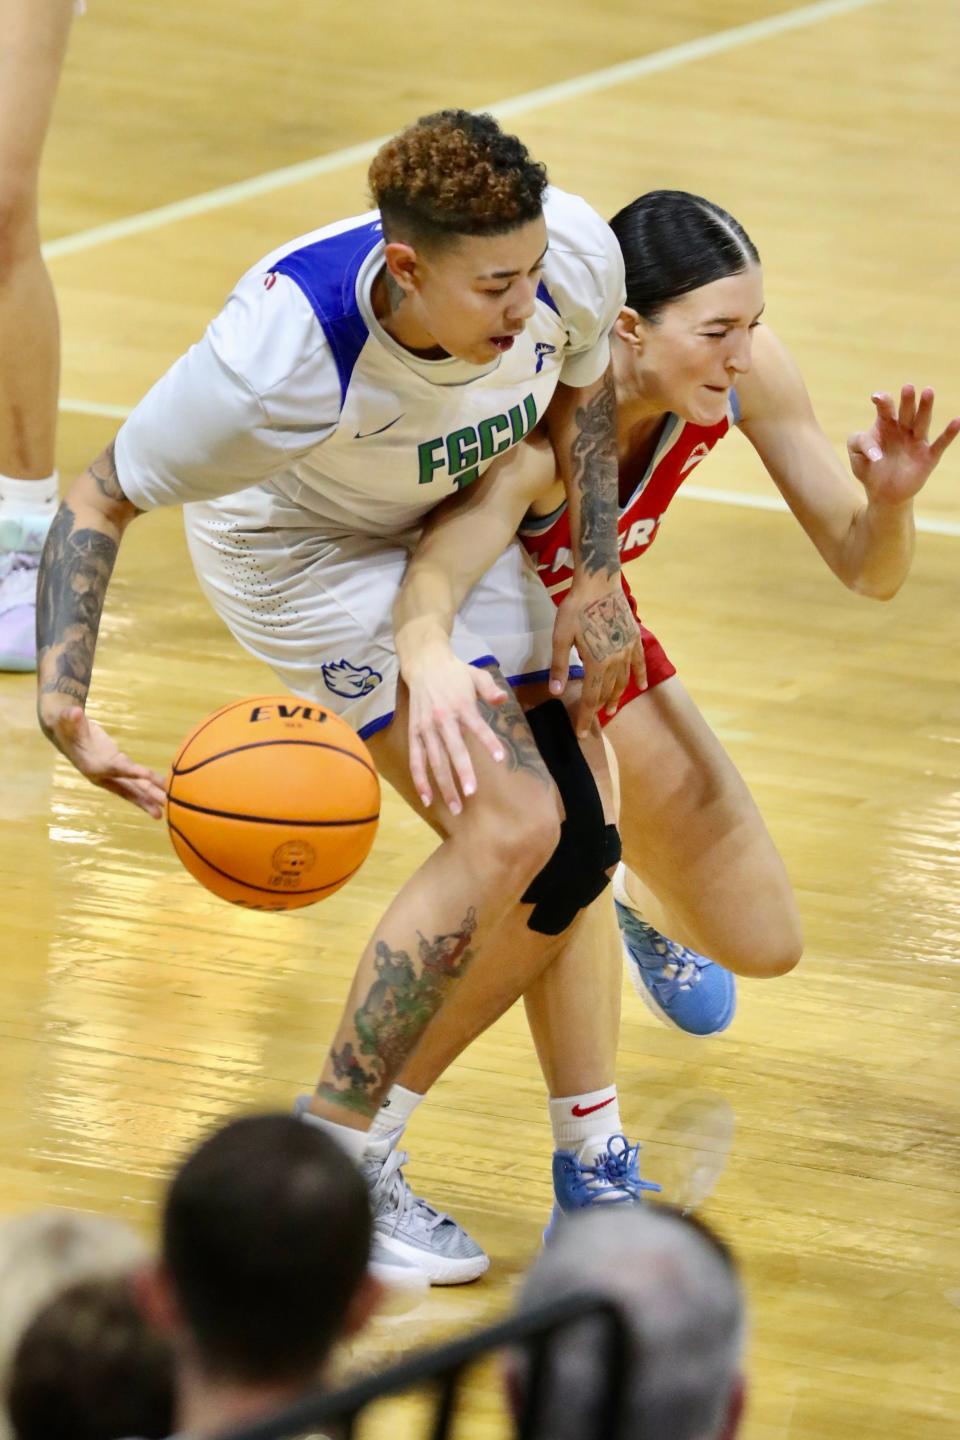 FGCU women's basketball took on one-loss Liberty in a key ASUN game. FGCU won this hard fought game.